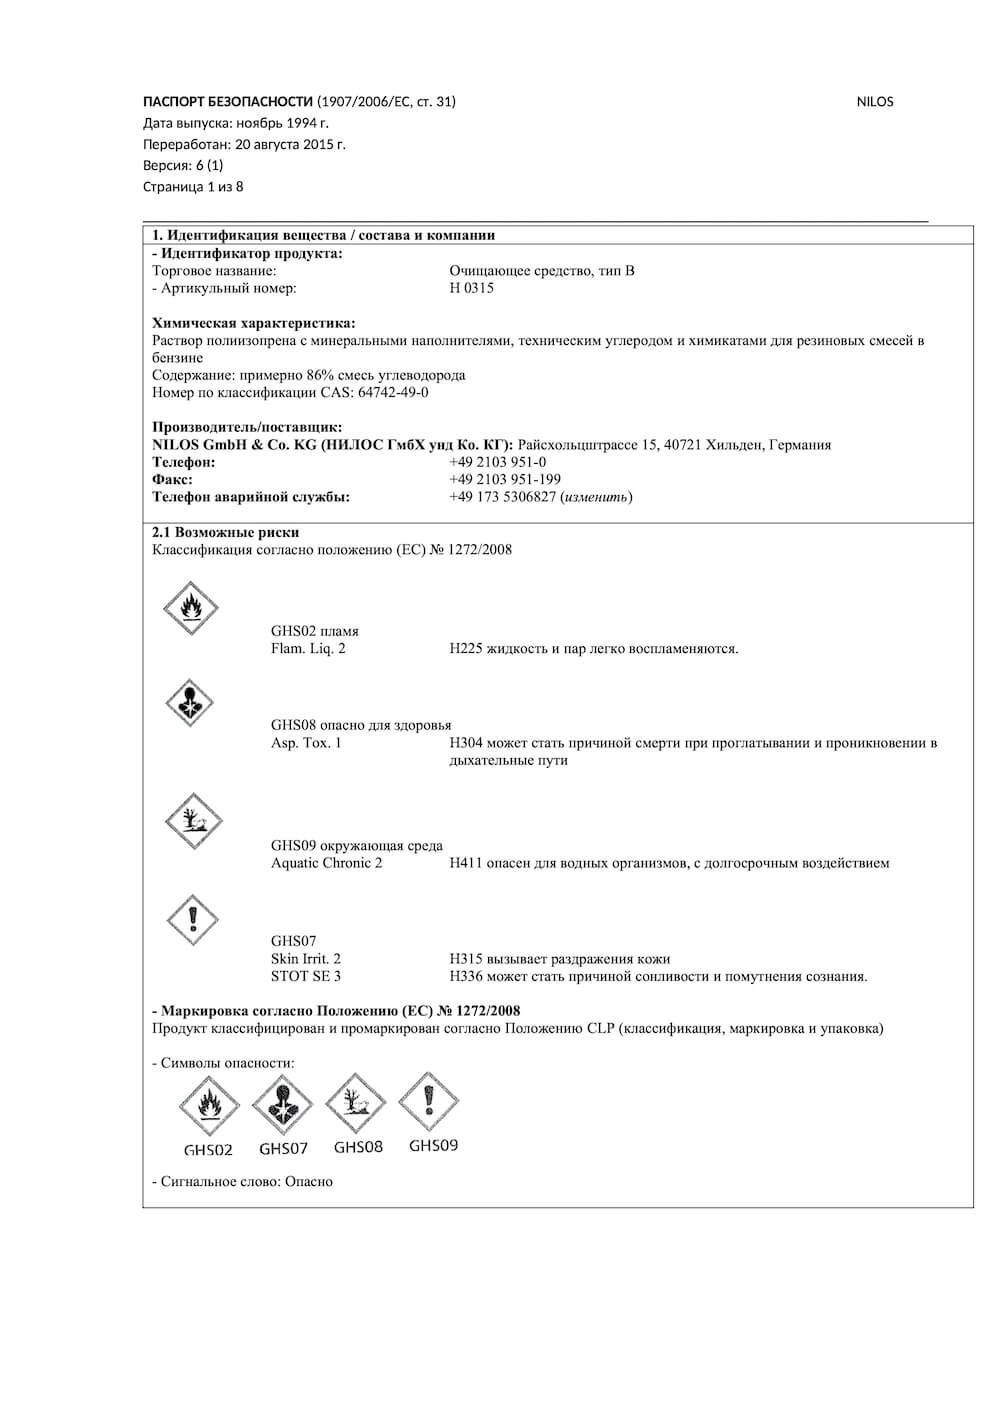 The first page of an SDS translated into Russian with basic formatting